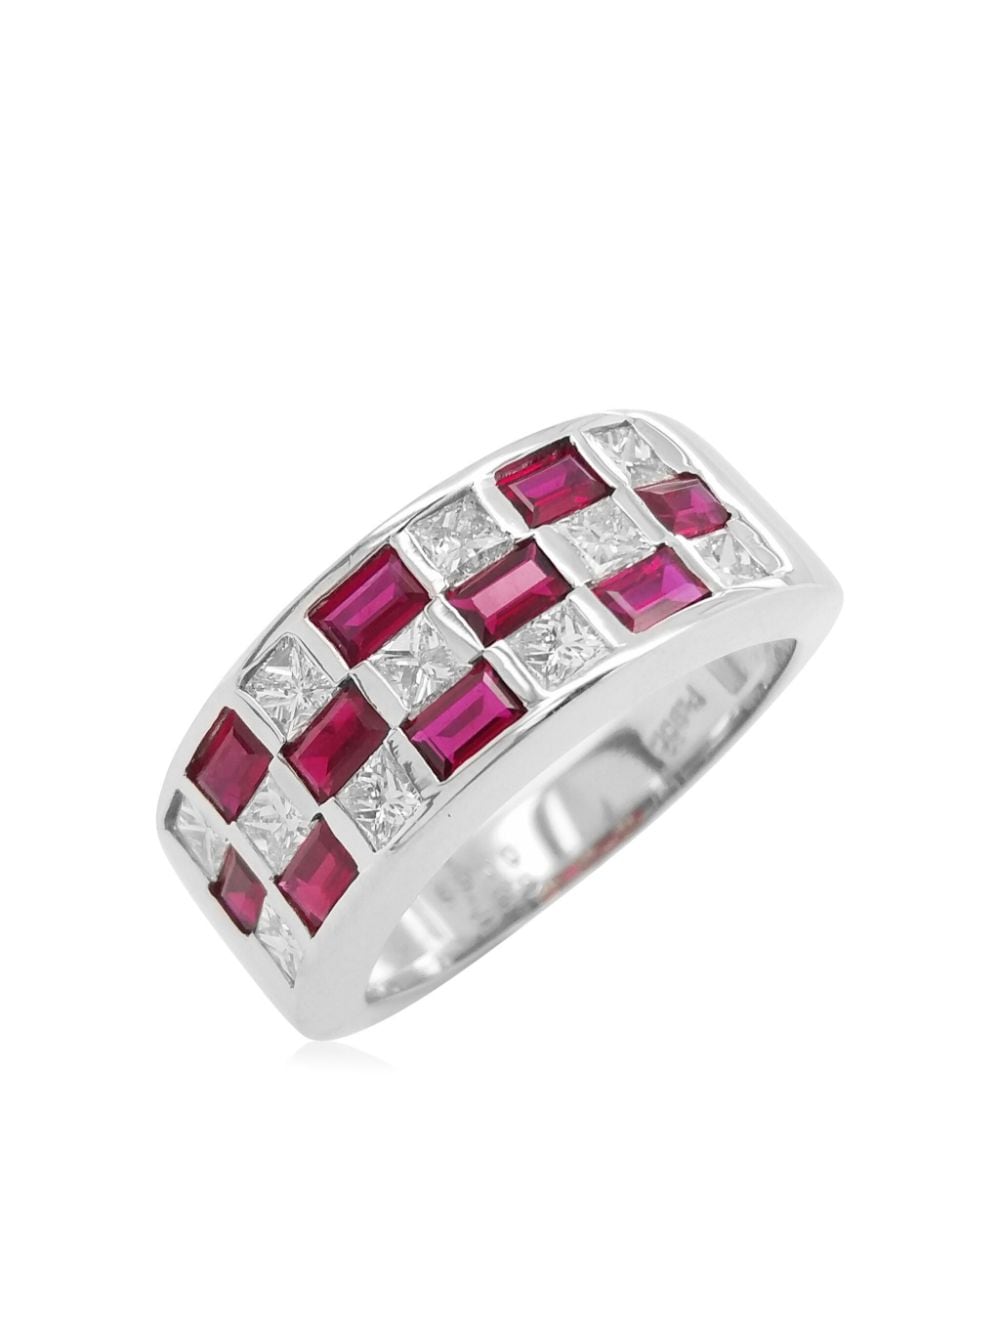 Shop Hyt Jewelry Platinum Diamond And Ruby Ring In Red